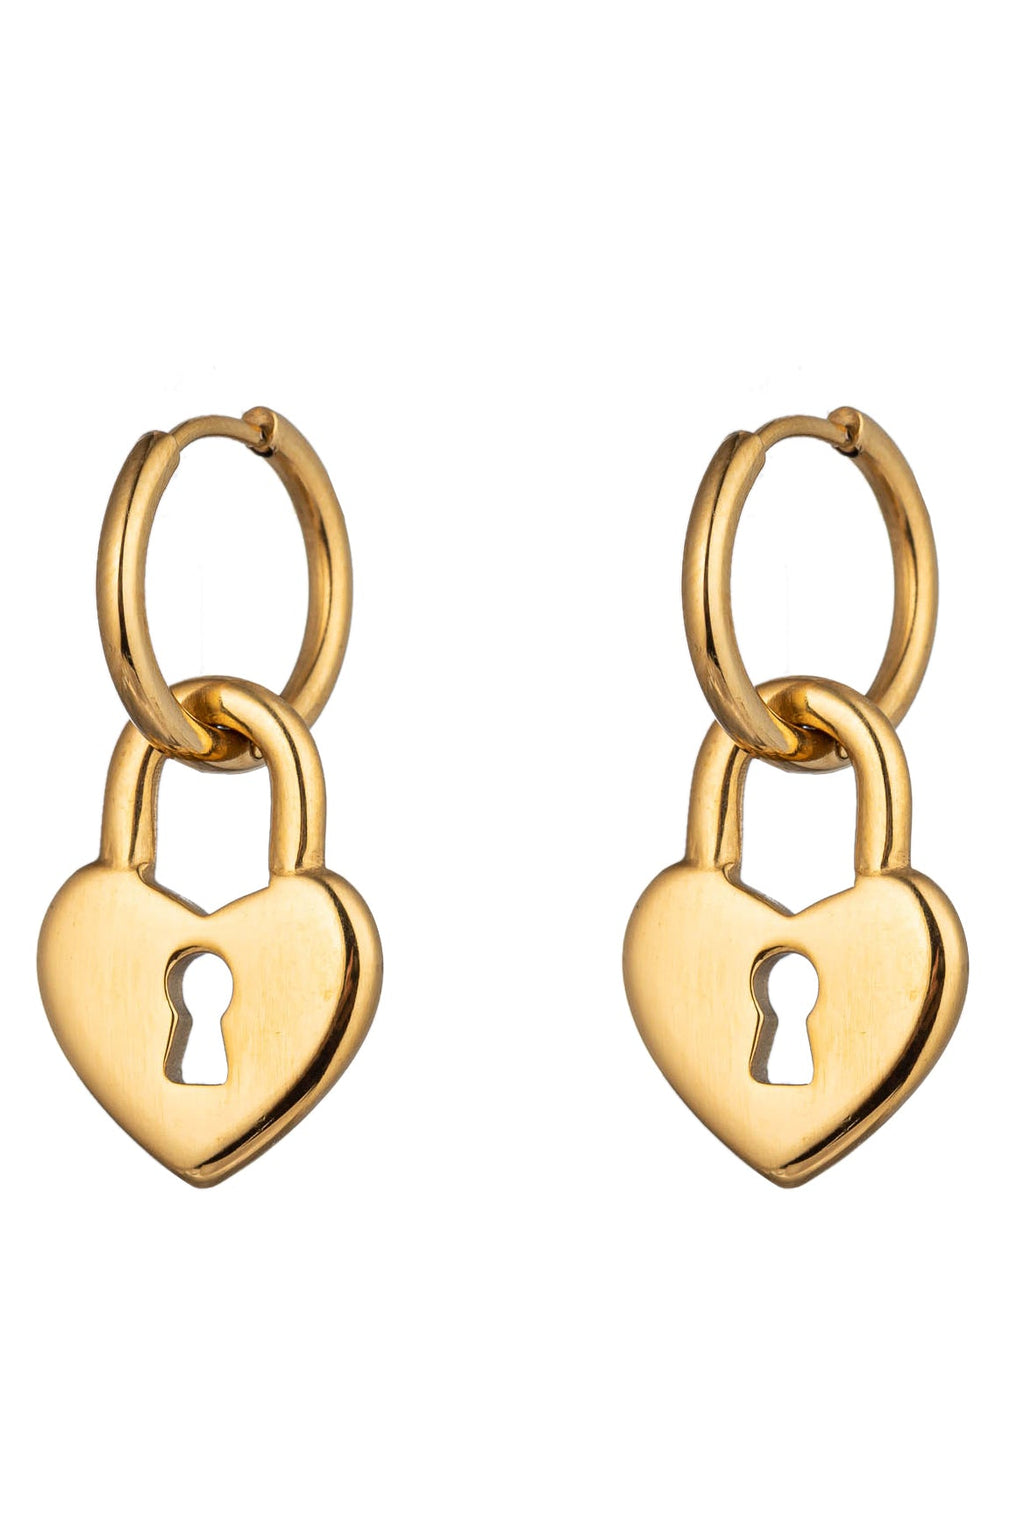 Louise Golden Lock Huggie Earring: A Glamorous Key to Your Style.